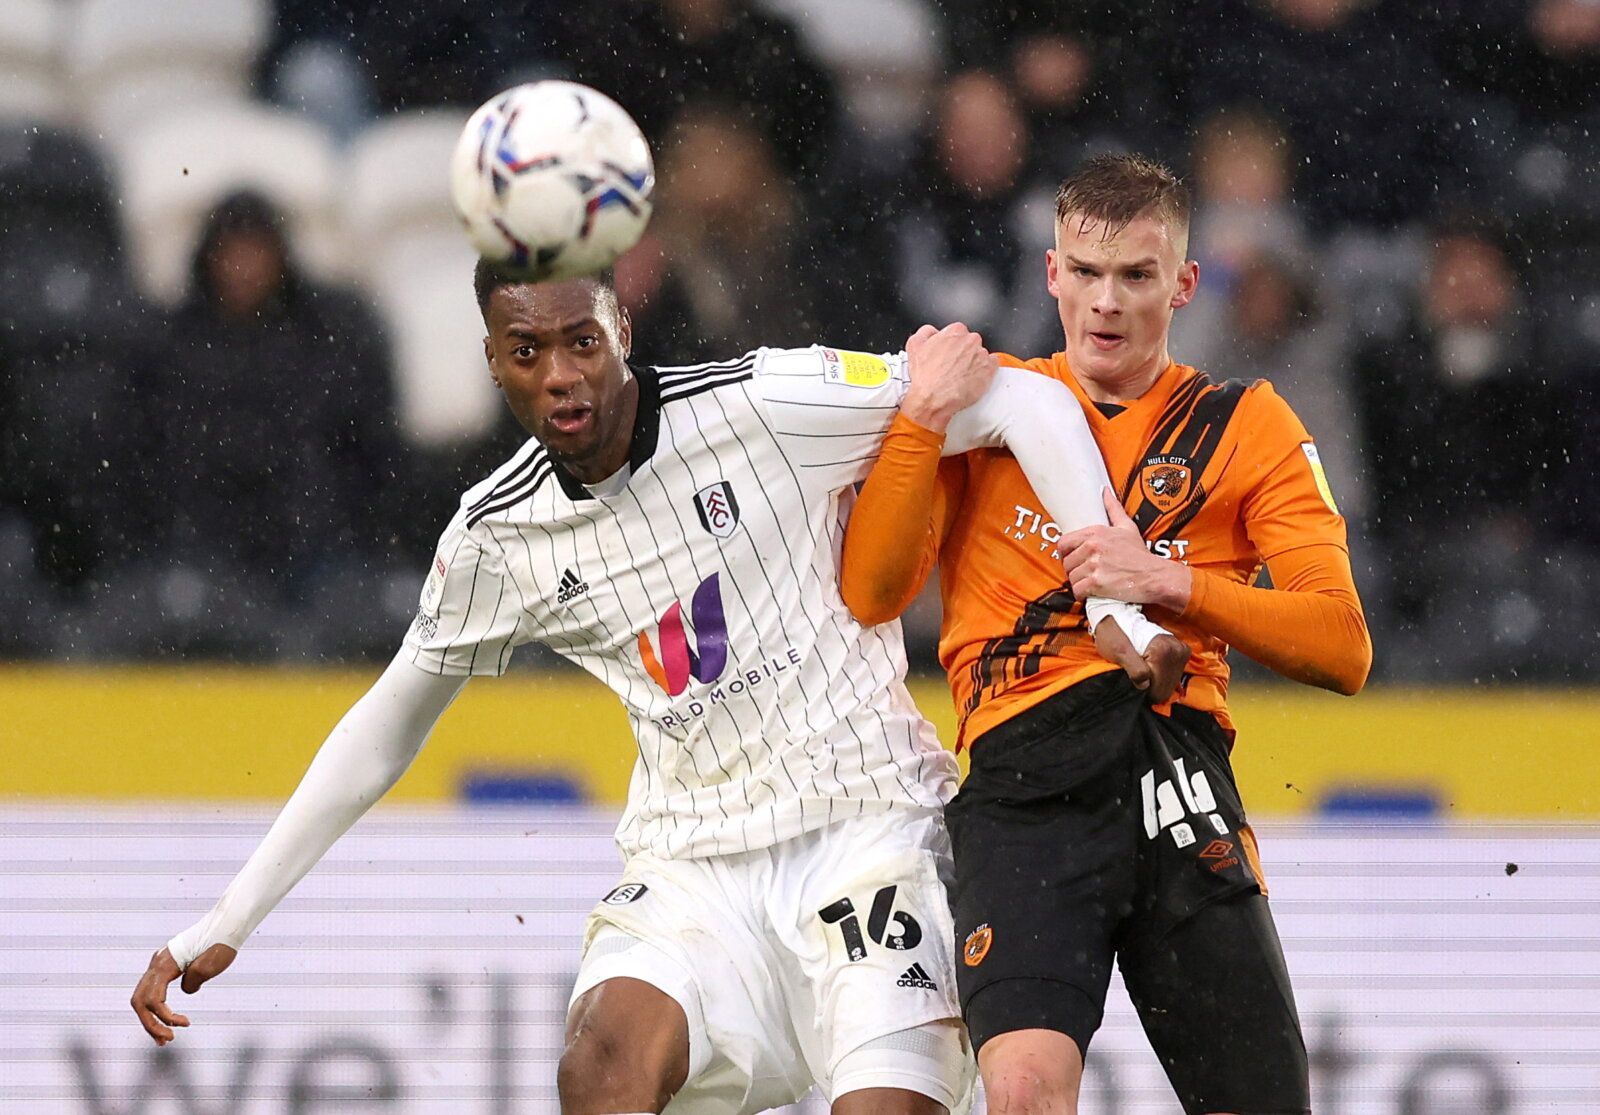 Soccer Football - Championship - Hull City v Fulham - KCOM Stadium, Hull, Britain - February 12, 2022  Fulham's Tosin Adarabioyo in action with Hull City's Marcus Forss  Action Images/John Clifton  EDITORIAL USE ONLY. No use with unauthorized audio, video, data, fixture lists, club/league logos or 